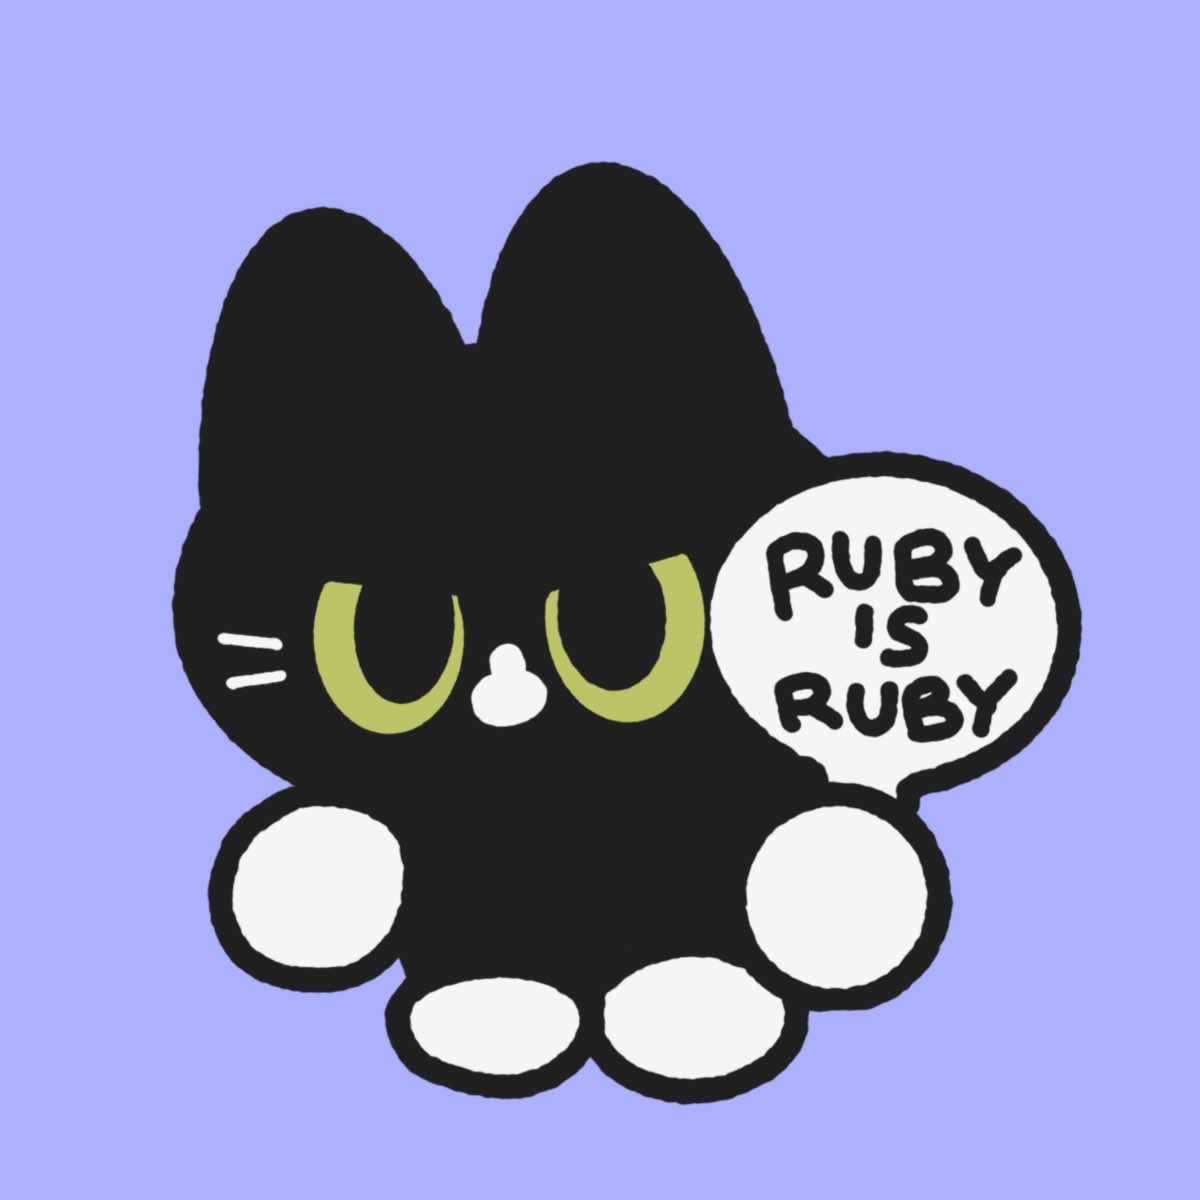 fyi Ruby and my 7 other cats are original characters, not fanart, and Ruby doll are not fanmade. I don't mind if you're going to love it because it's like your artist. Just want to tell you the right information. If I draw fanart, I put a hashtag with the artist's name🙌🏻